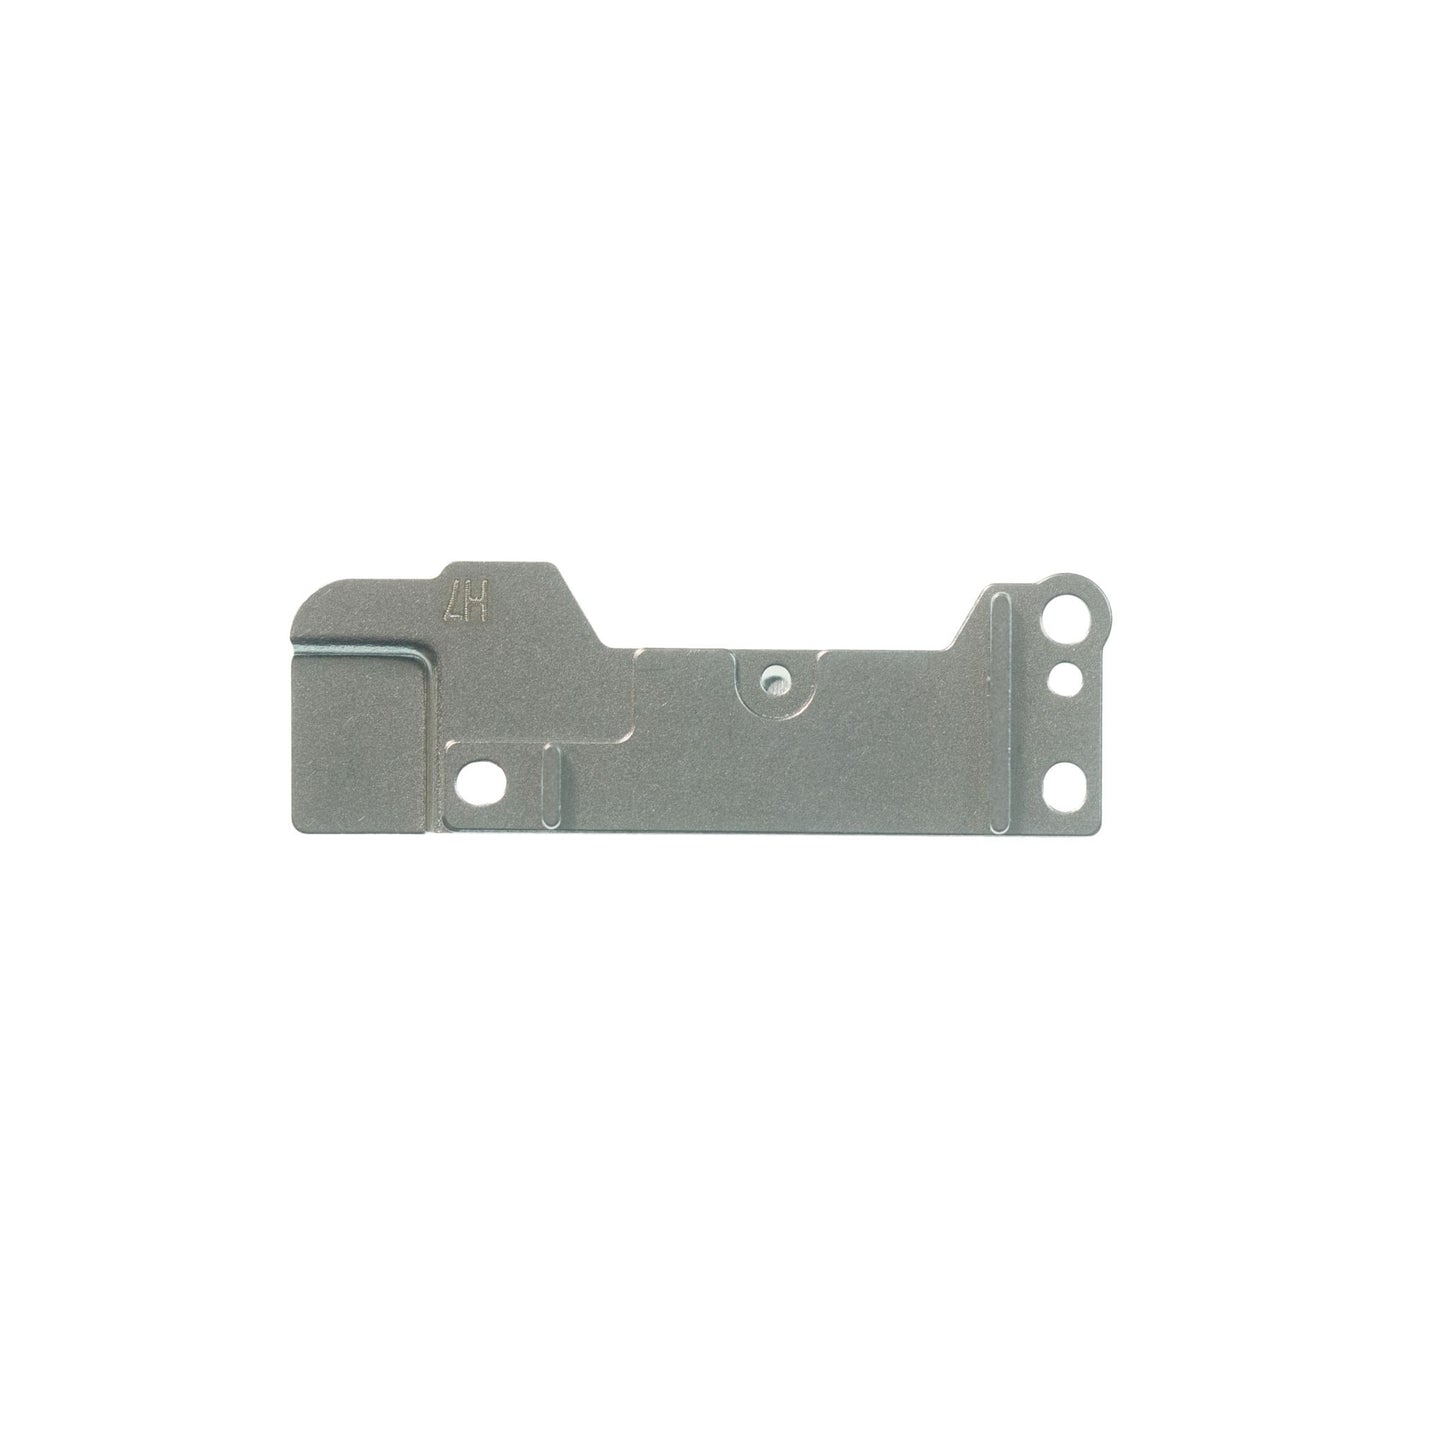 iPhone 6s Plus Home Button Metal Bracket